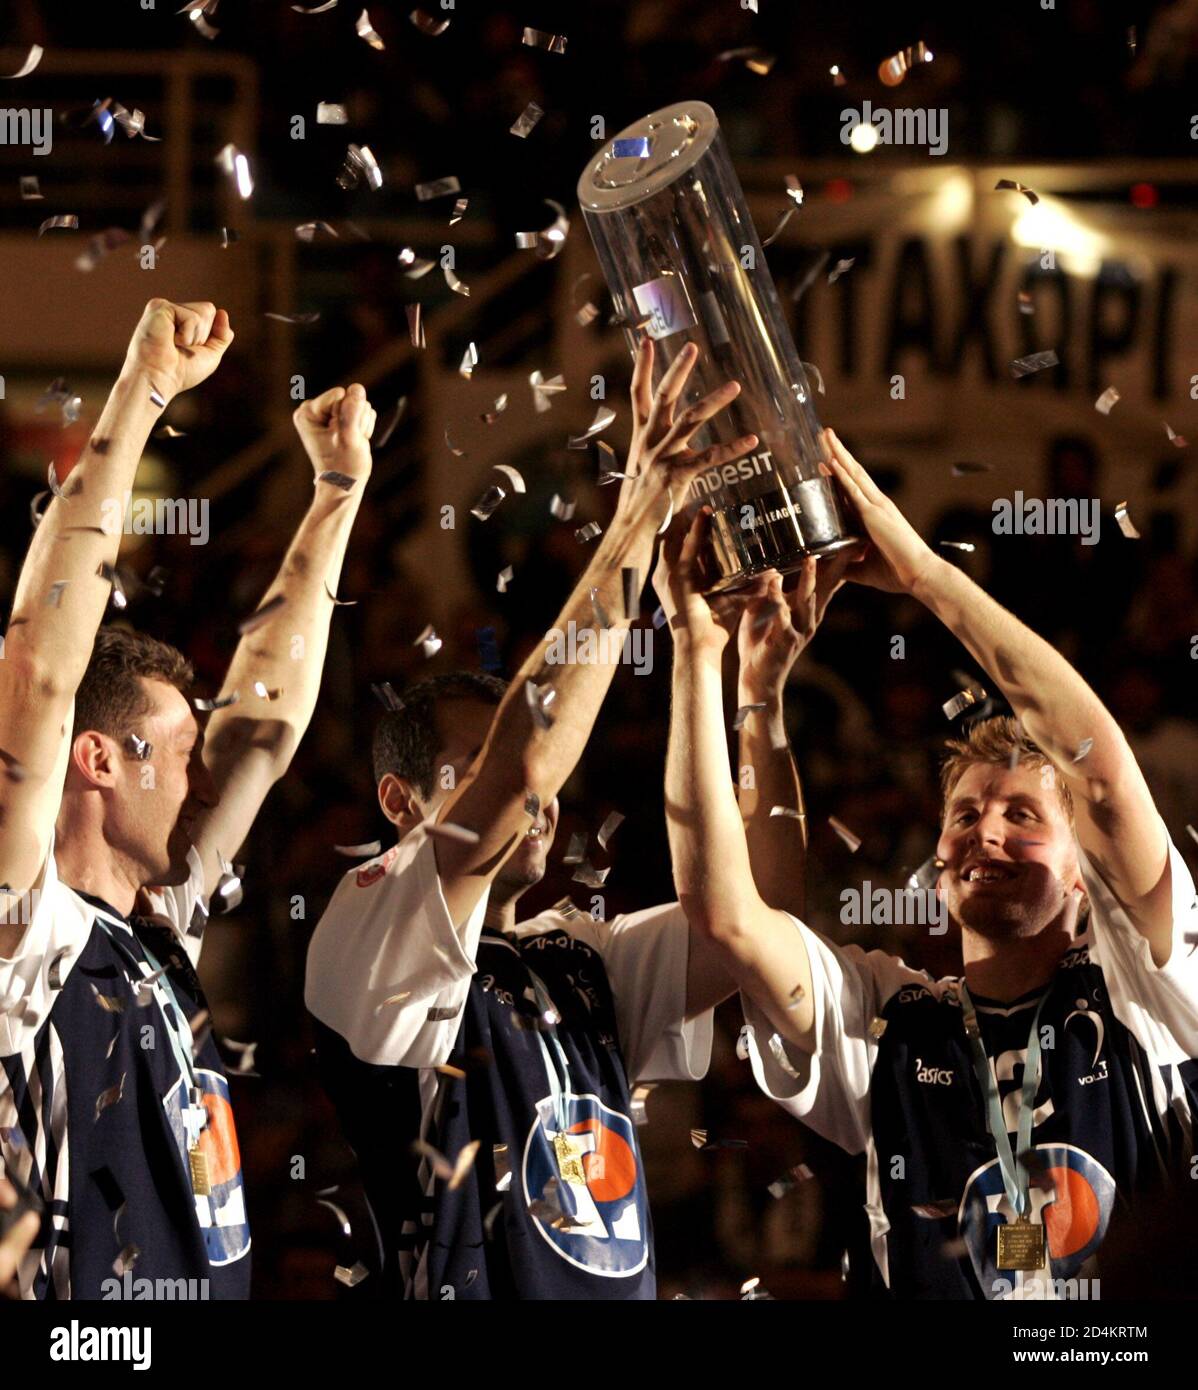 France's Tours players rise European Cup after their victory in the final  Men's European Champions League Volleyball match against Greece's Iraklis  Thessaloniki in Thessaloniki. France's Tours players rise the European Cup  after